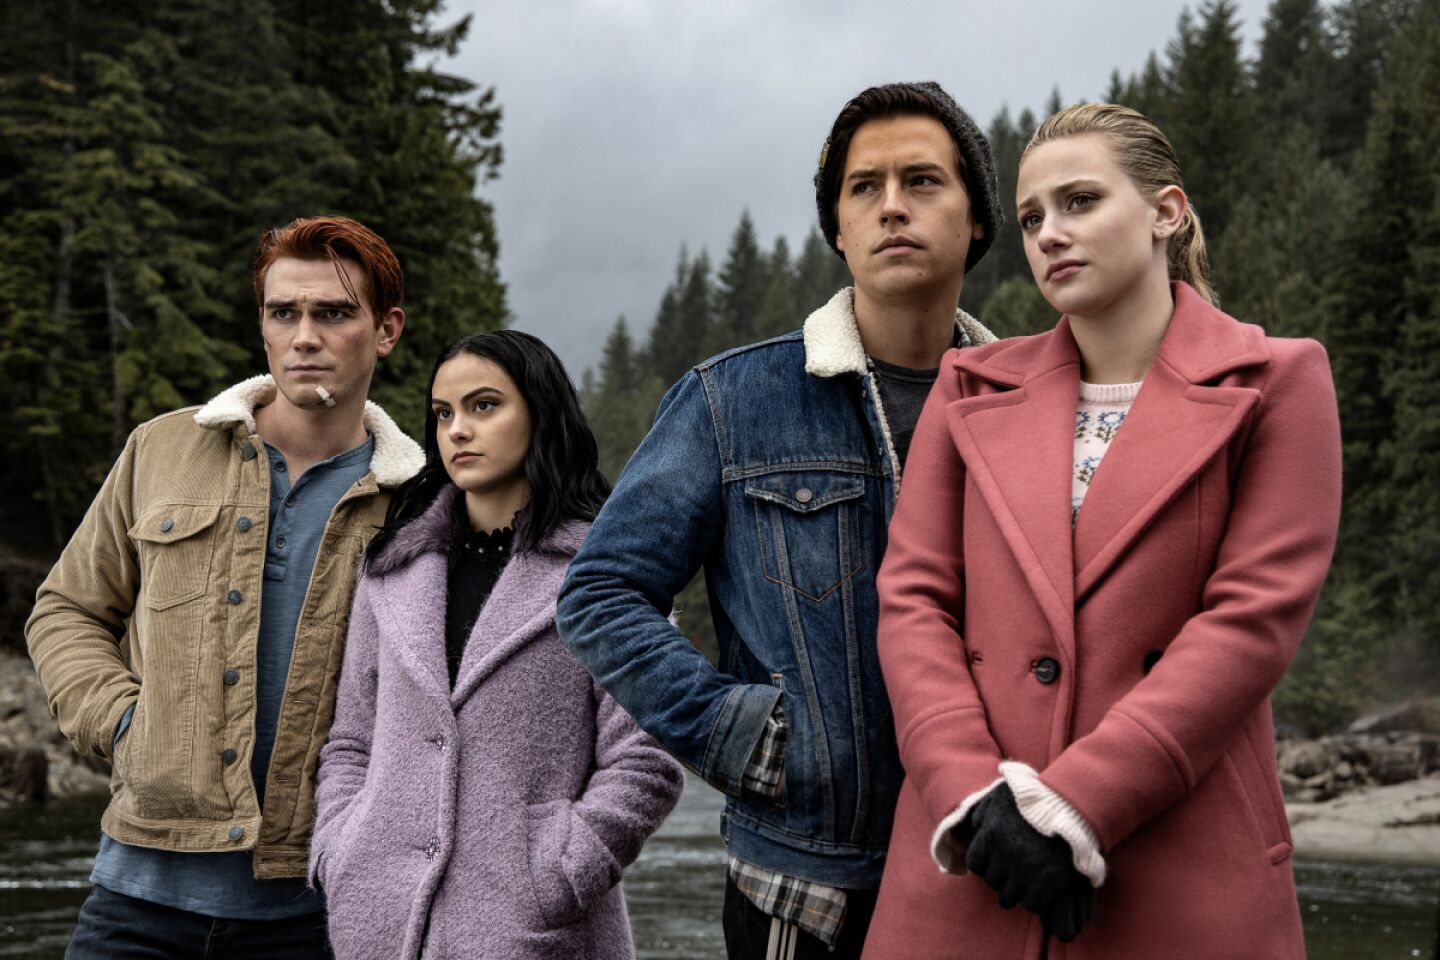 The popular Netflix show "Riverdale" is filmed in Vancouver.